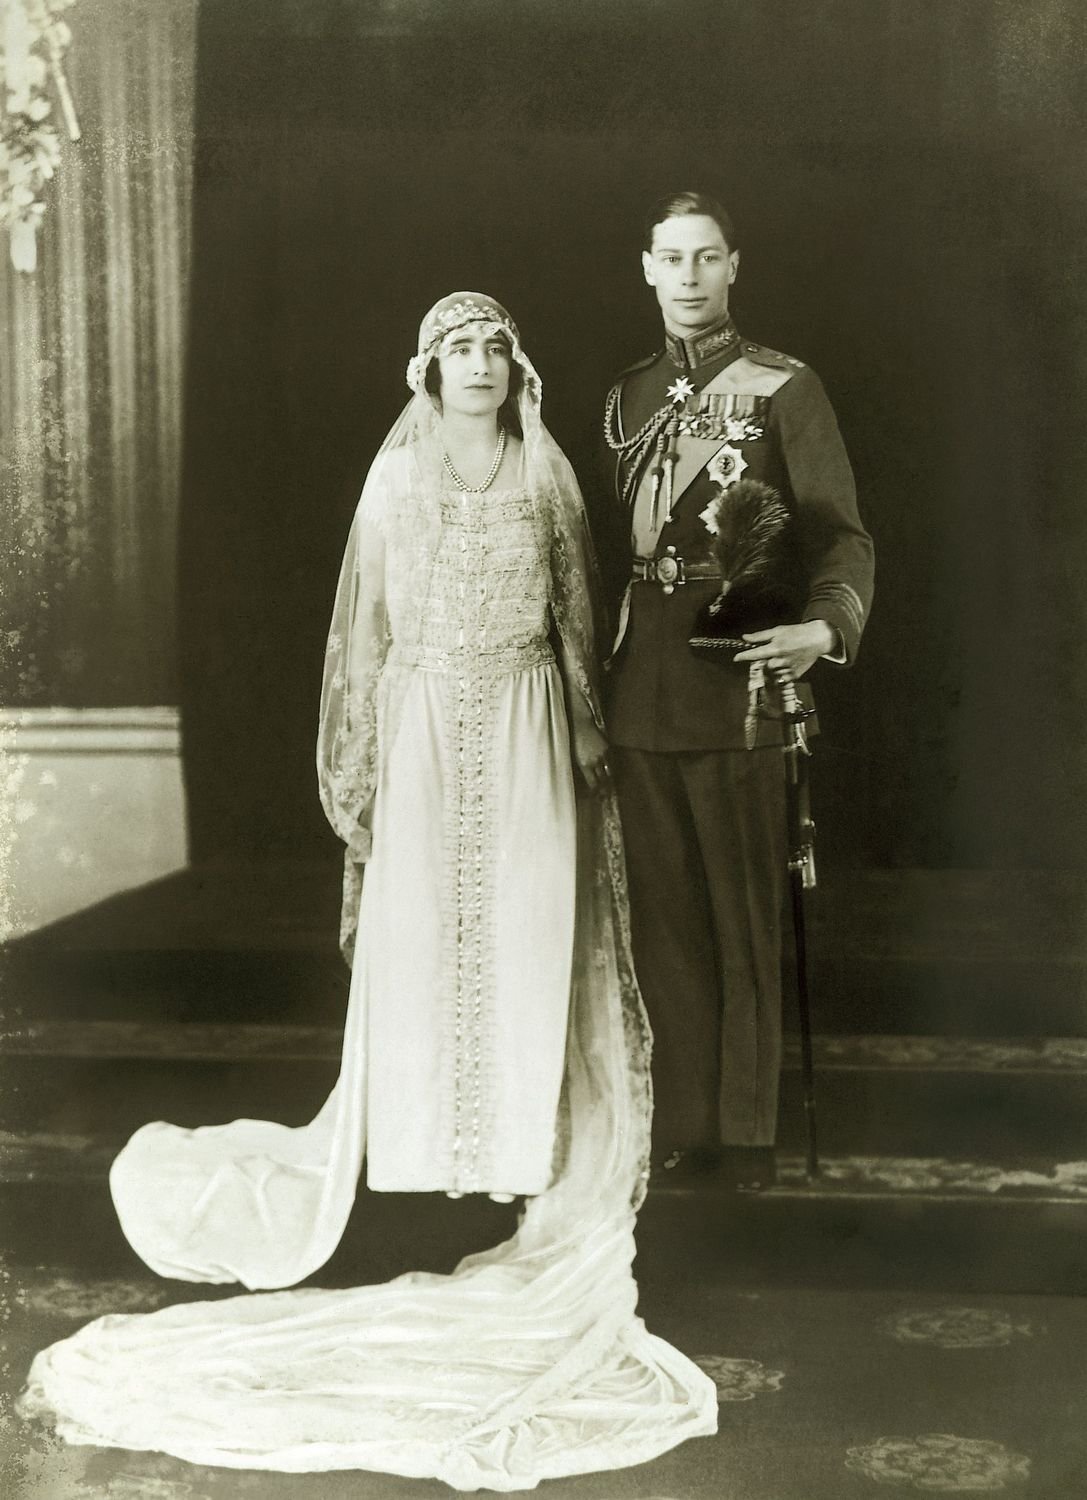 Photograph of the Duke of York and Lady Elizabeth Bowes Lyon on their wedding day